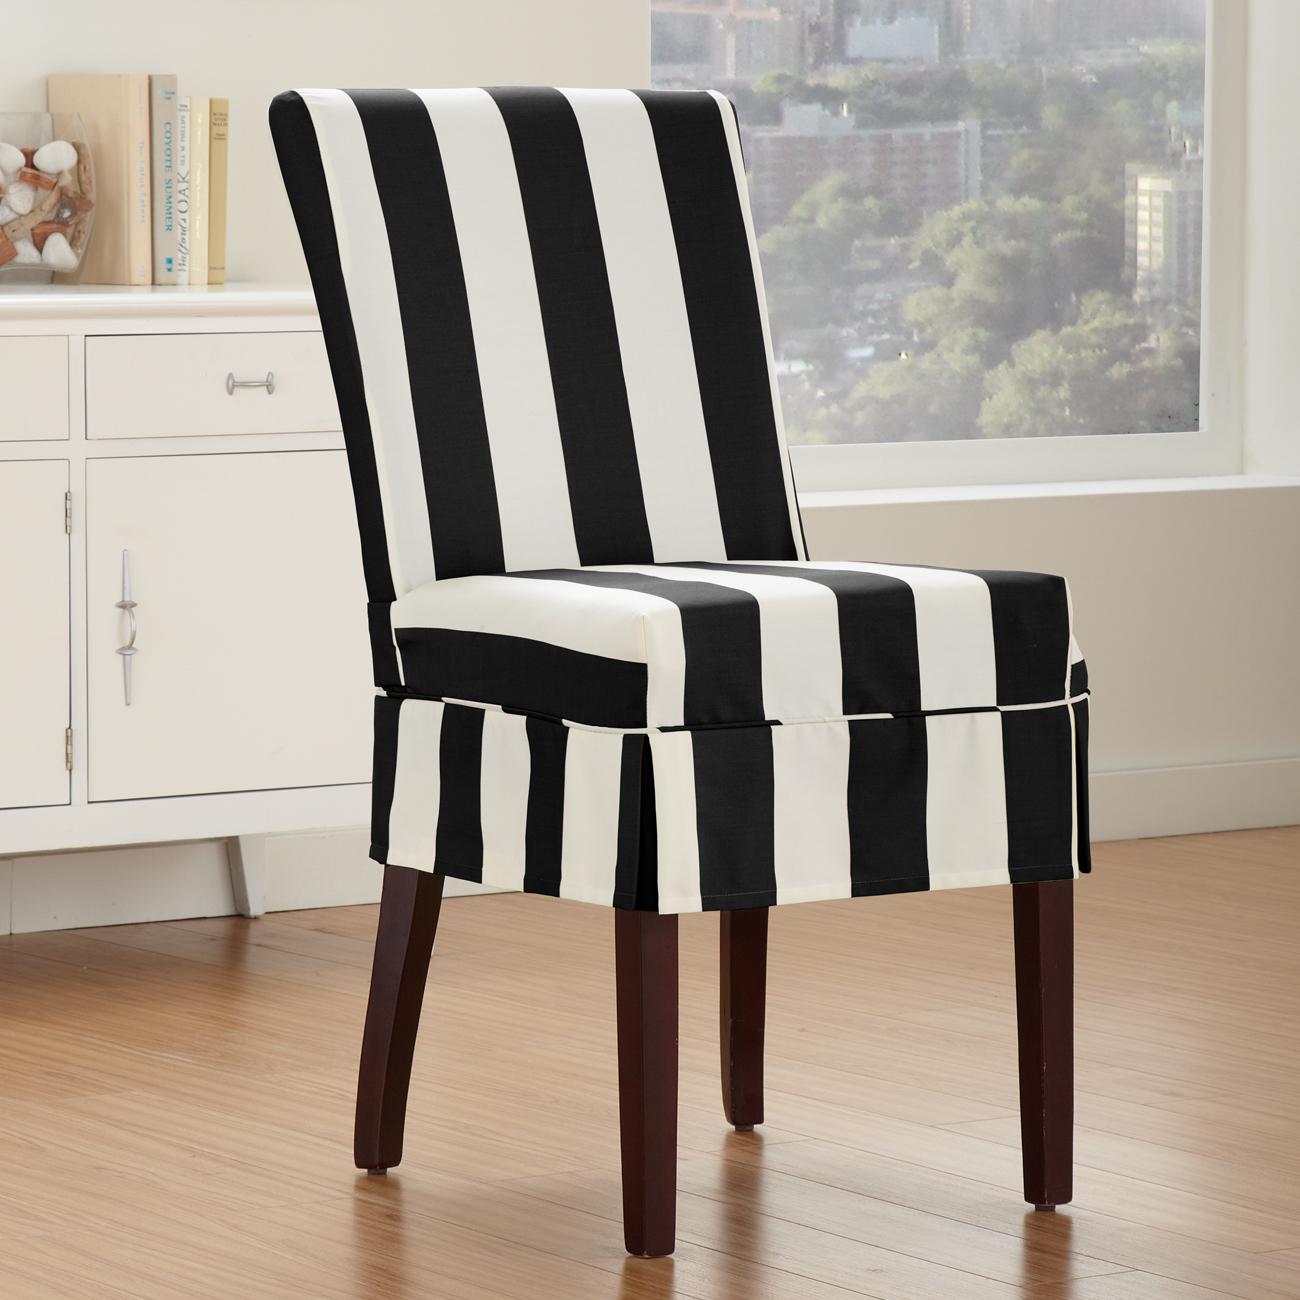 slipcover for dining chair photo - 2